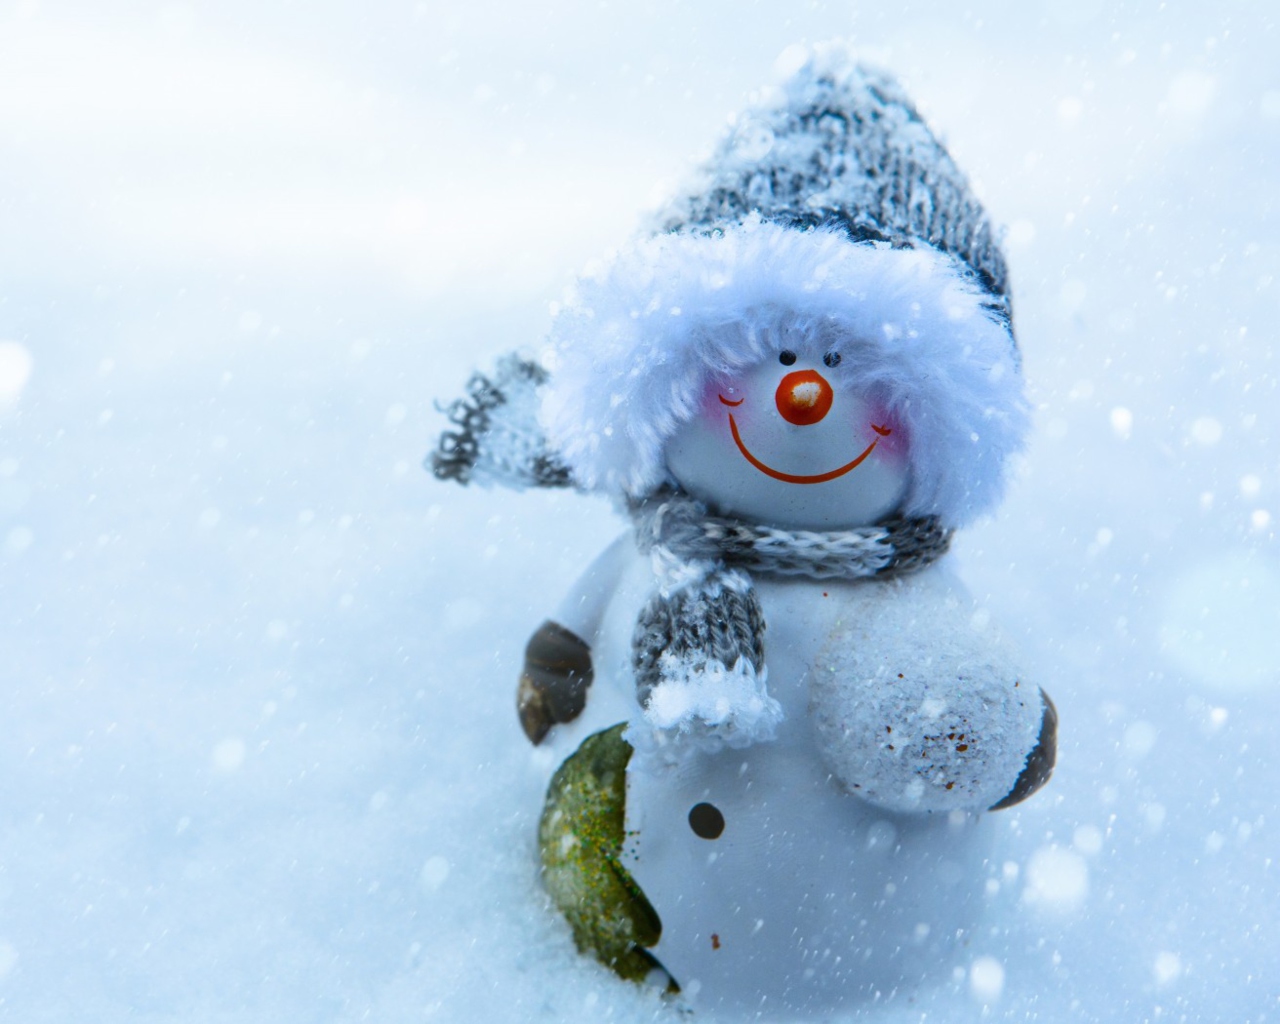 Snowman Covered With Snowflakes wallpaper 1280x1024